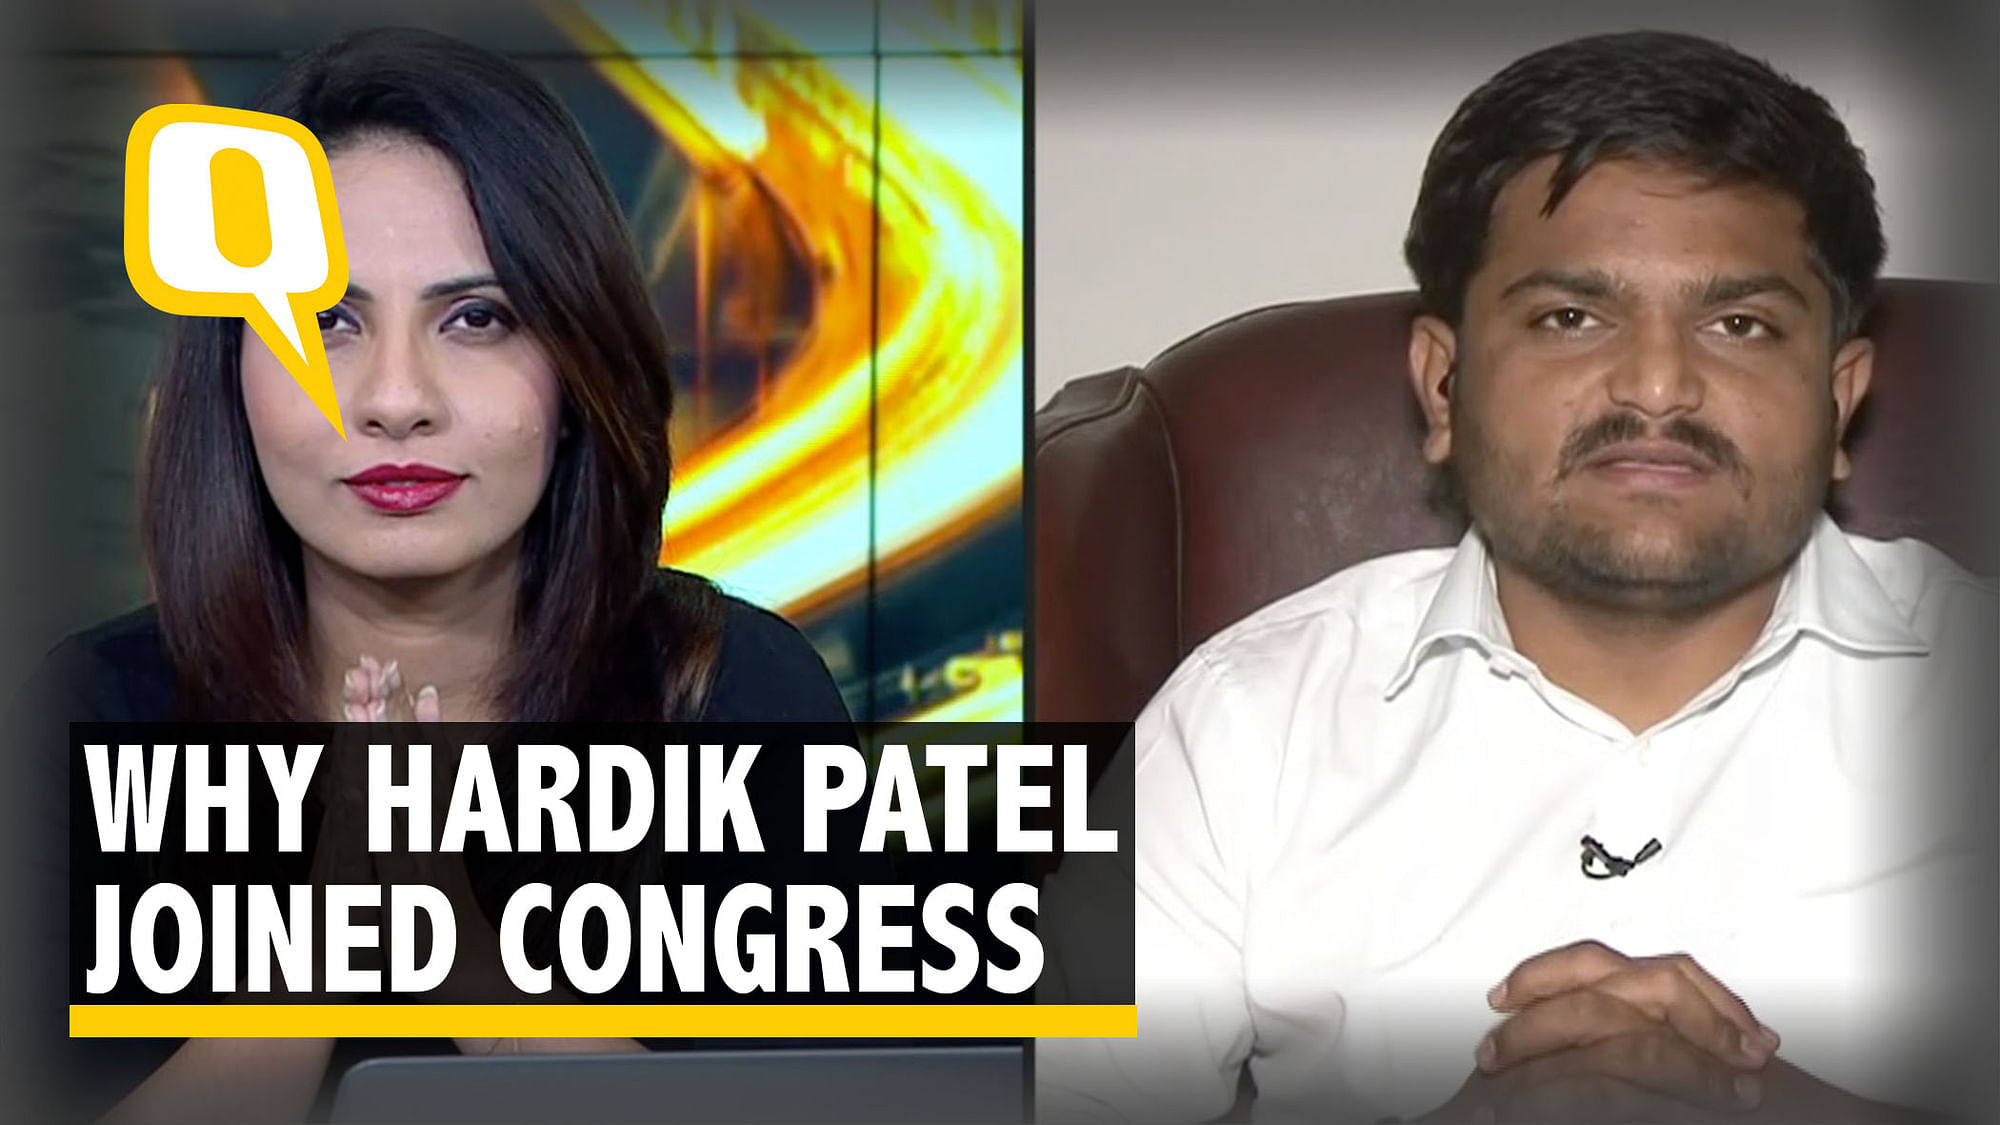 Hardik Patel tells why he joined the Congress.